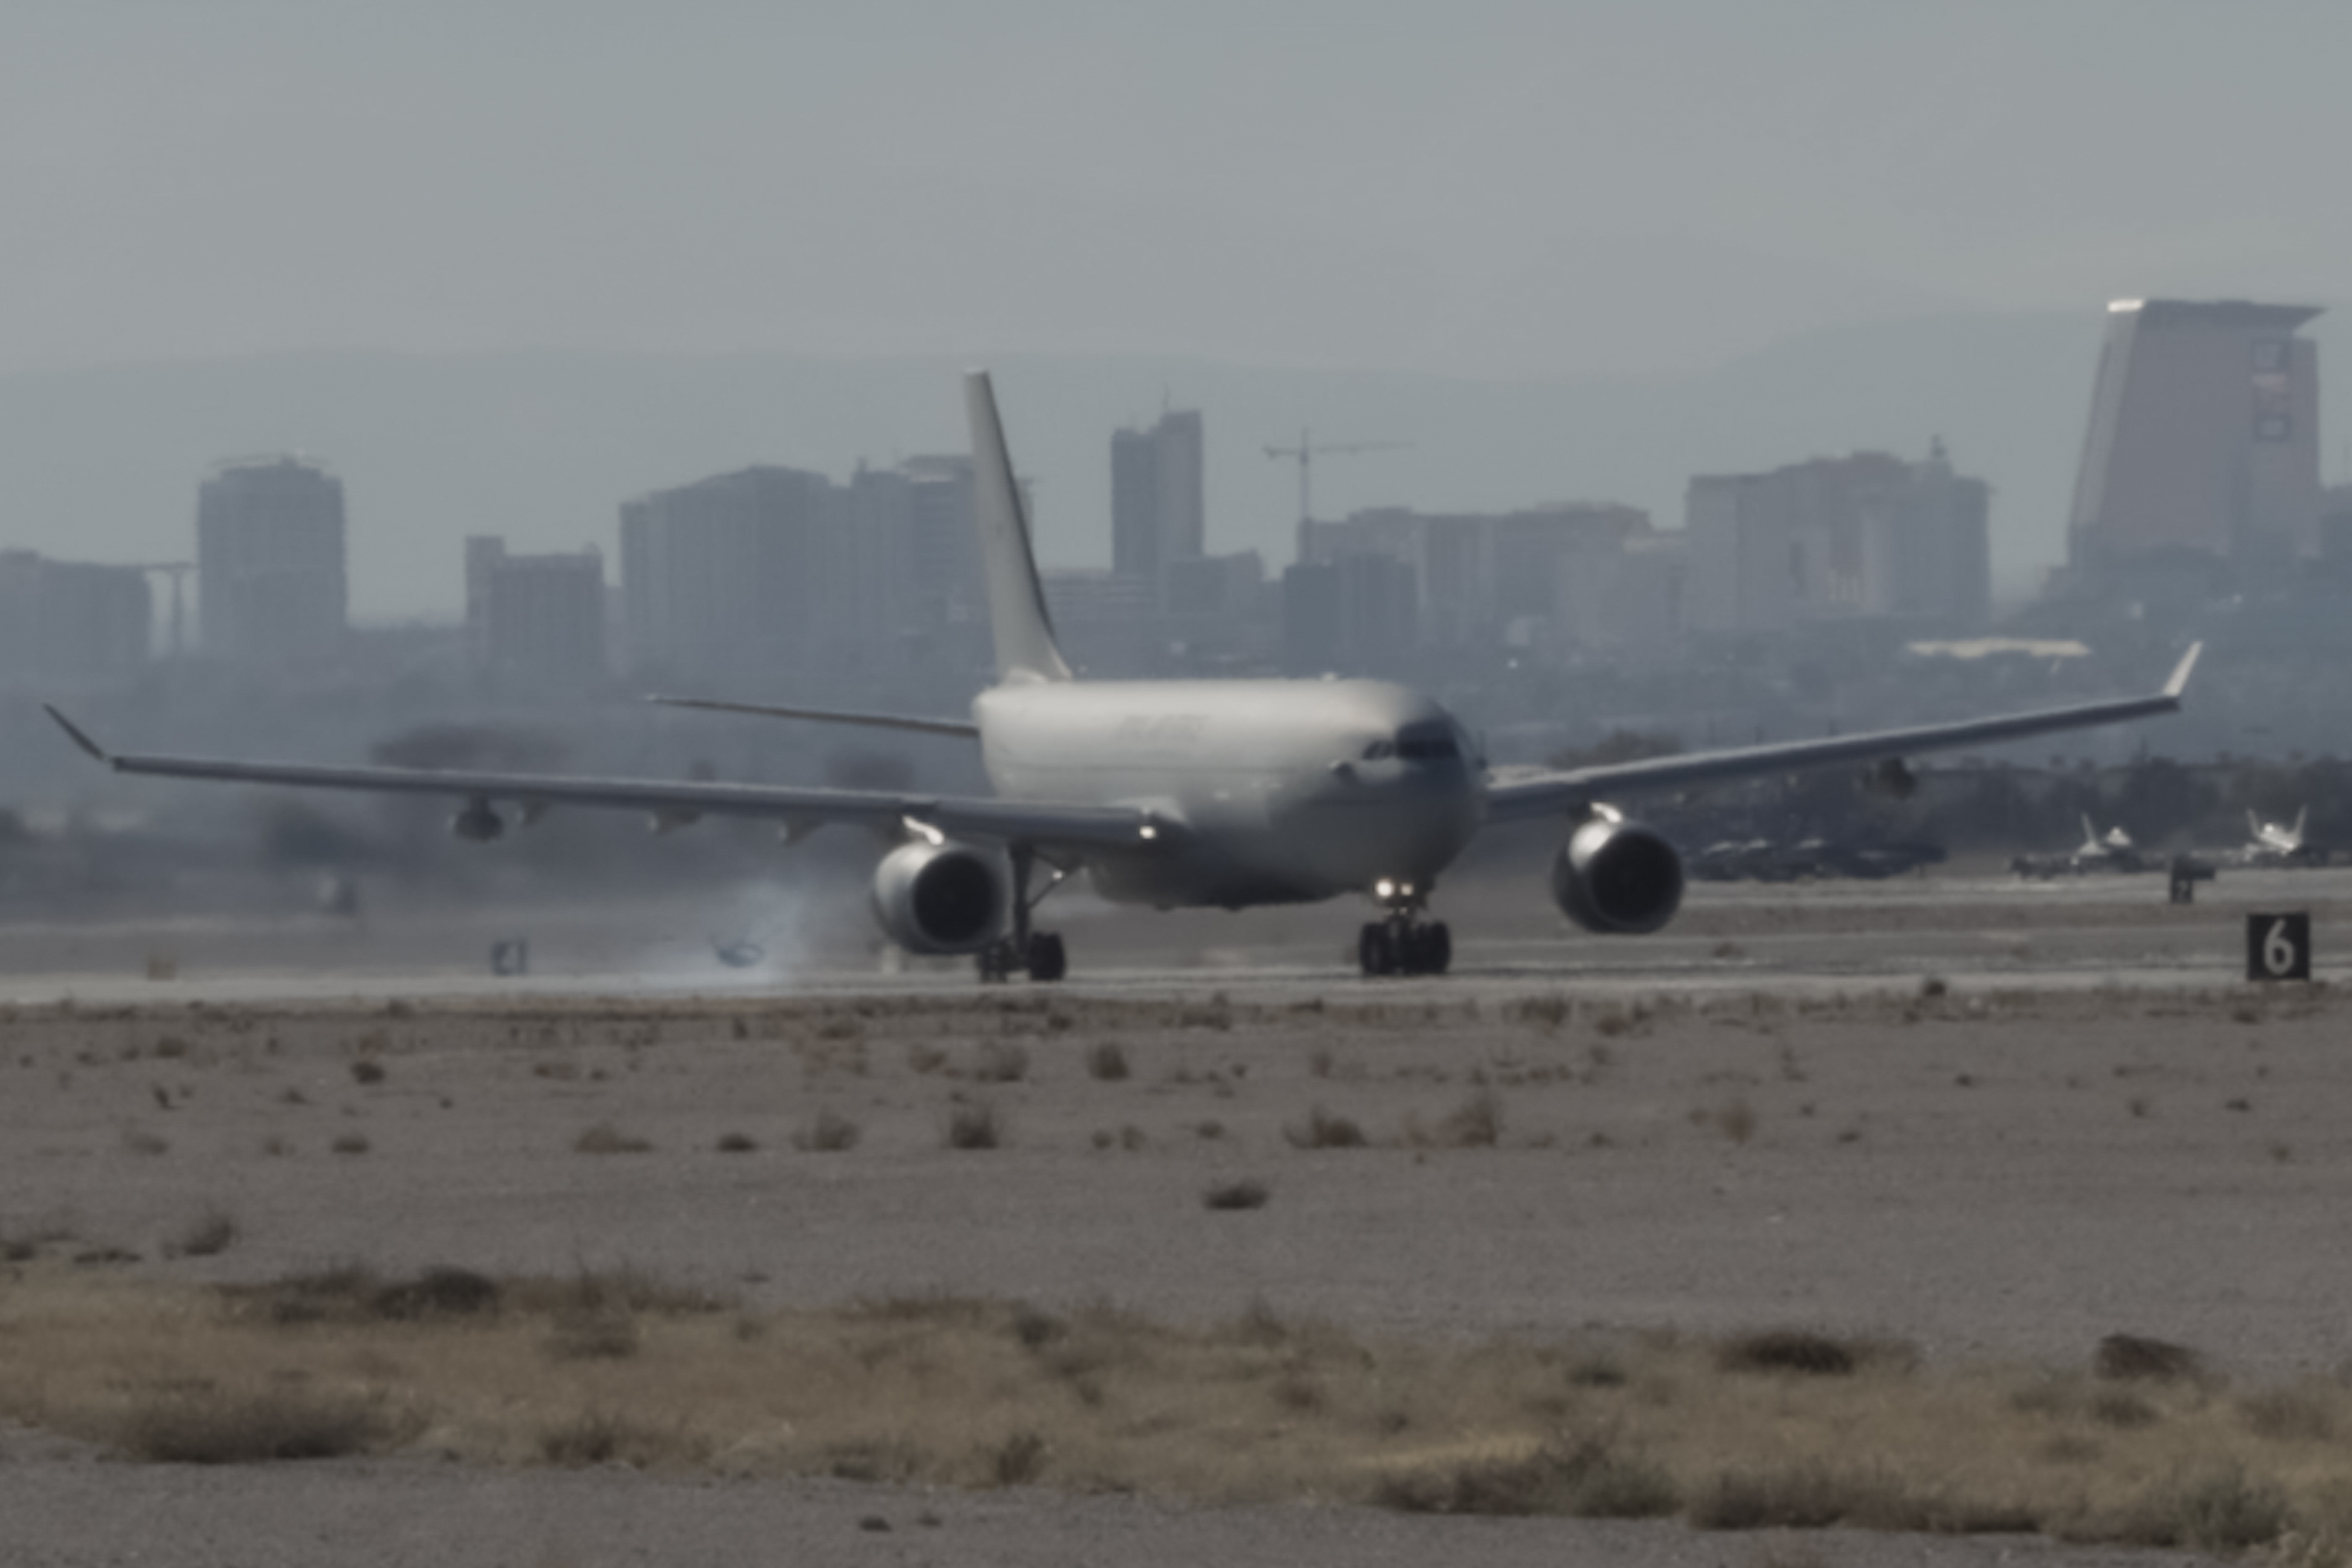 Voyager on the runway, with blown out tyre